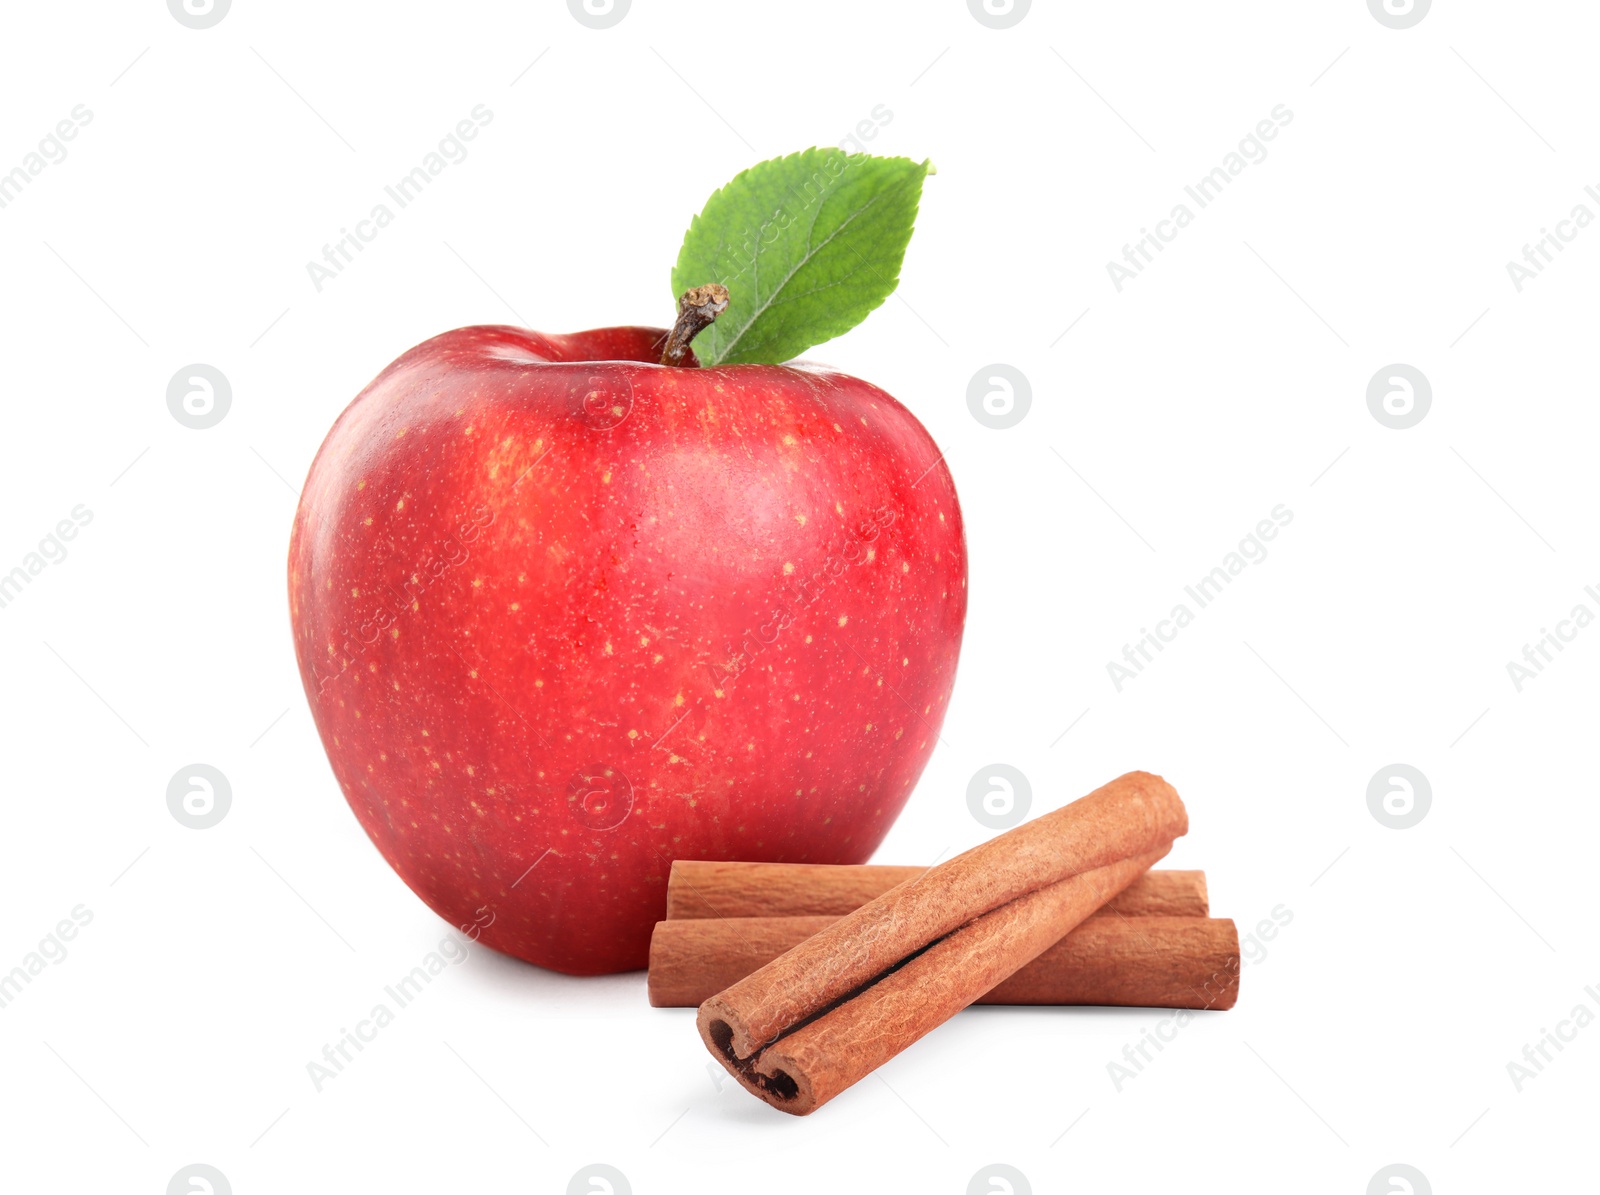 Image of Aromatic cinnamon sticks and red apple isolated on white